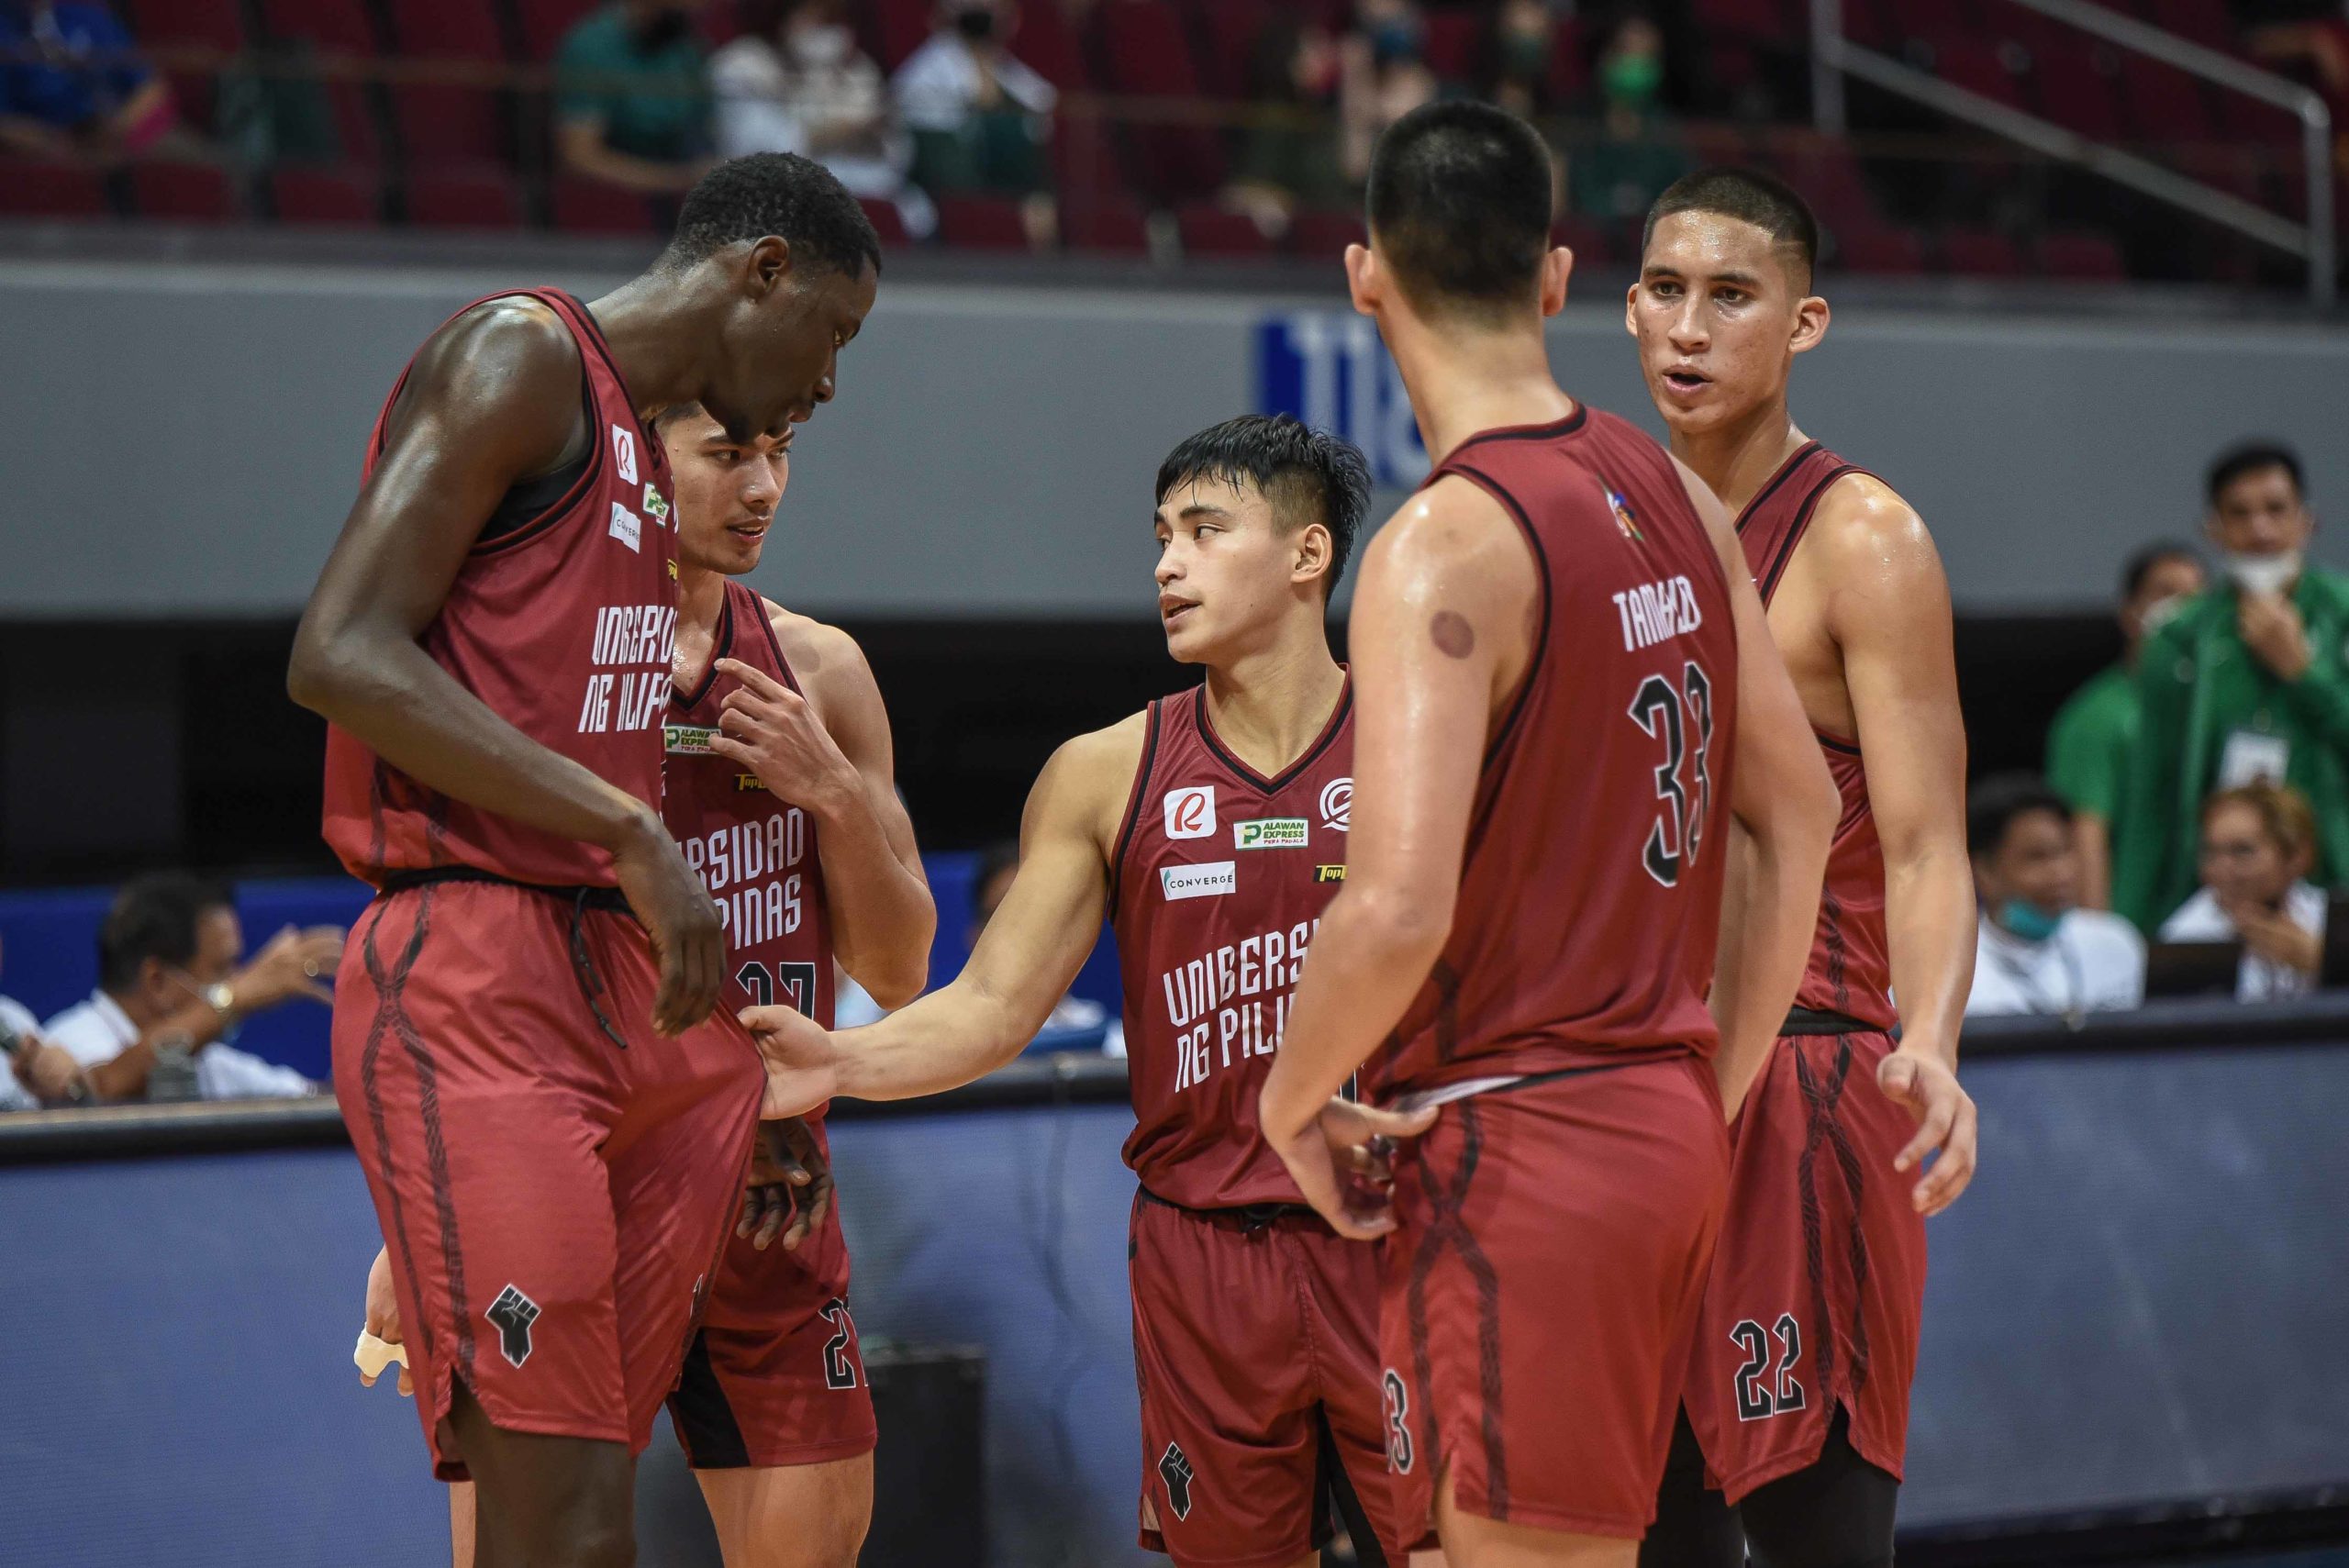 UP Fighting Maroons vs La Salle Green Archers in the UAAP Season 84 men's basketball action. UAAP PHOTO